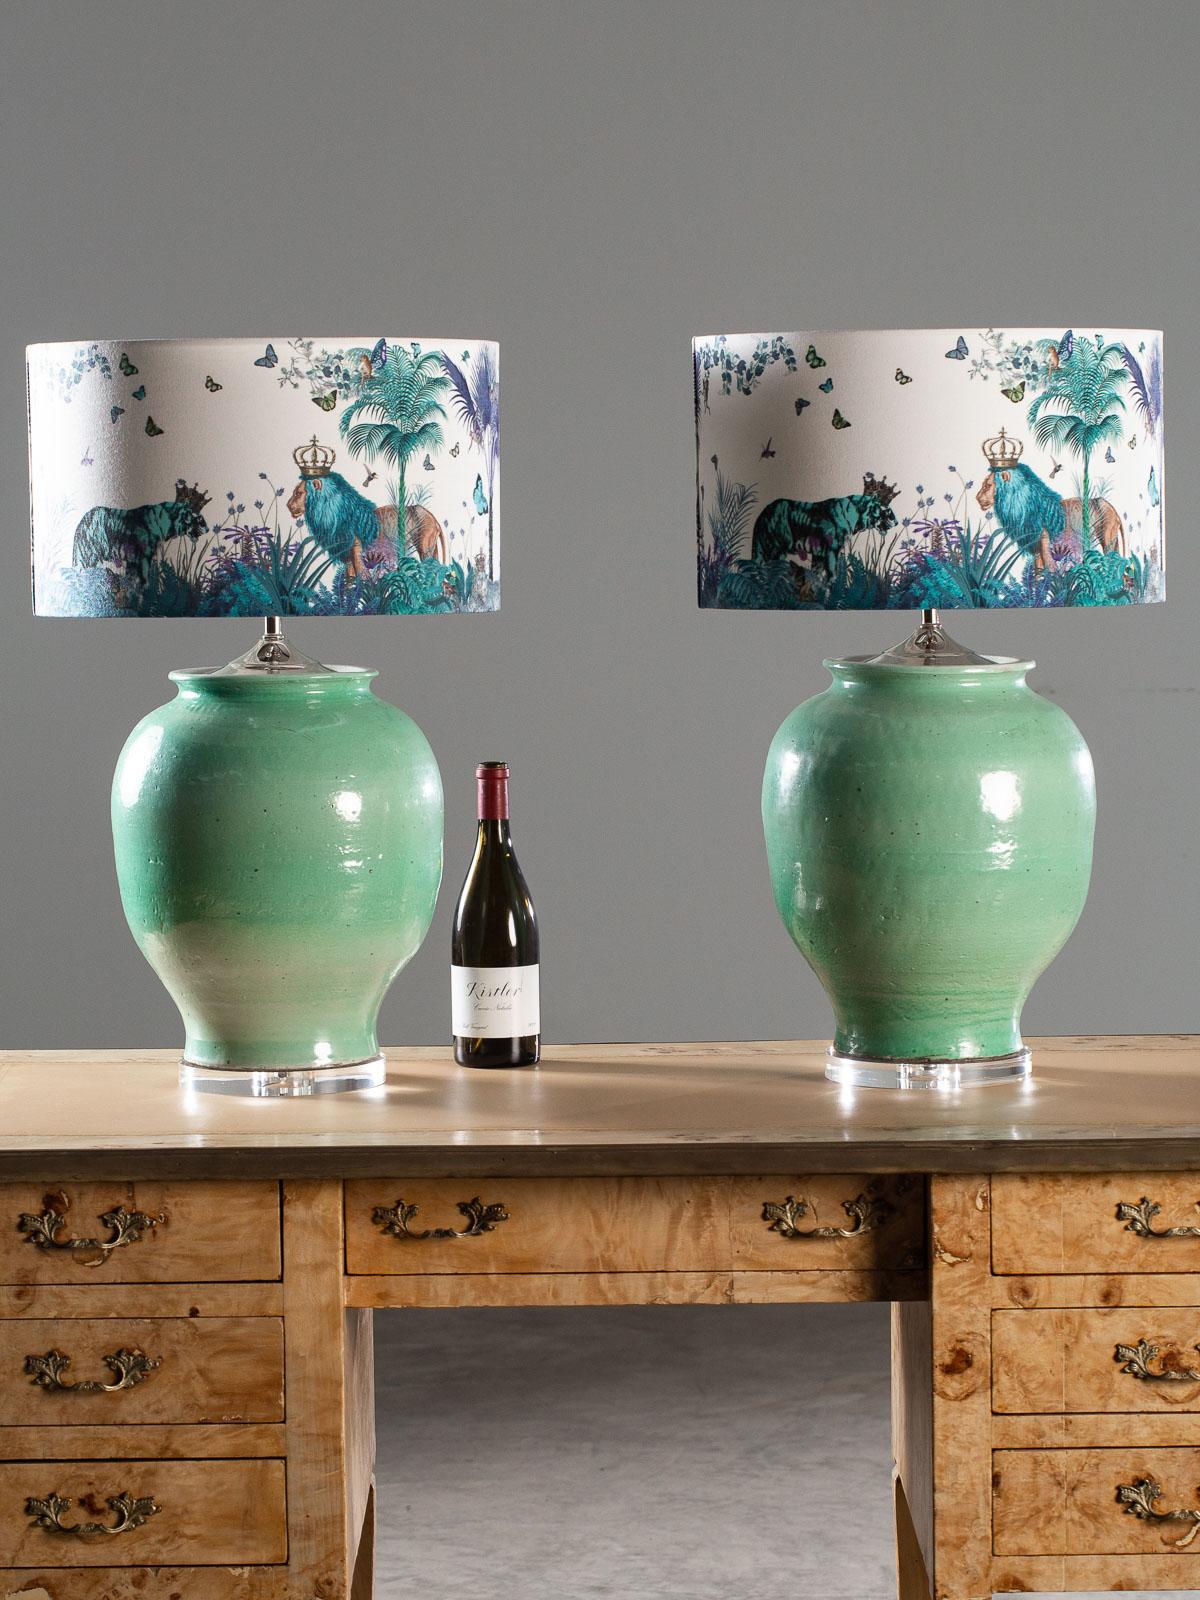 A pair of beautiful handmade turquoise ceramic vases transformed into custom lamps with Lucite bases. The gorgeous urns feature a rippled surface indicative of their hand crafted origin. Please enlarge all the photographs to see the unique details